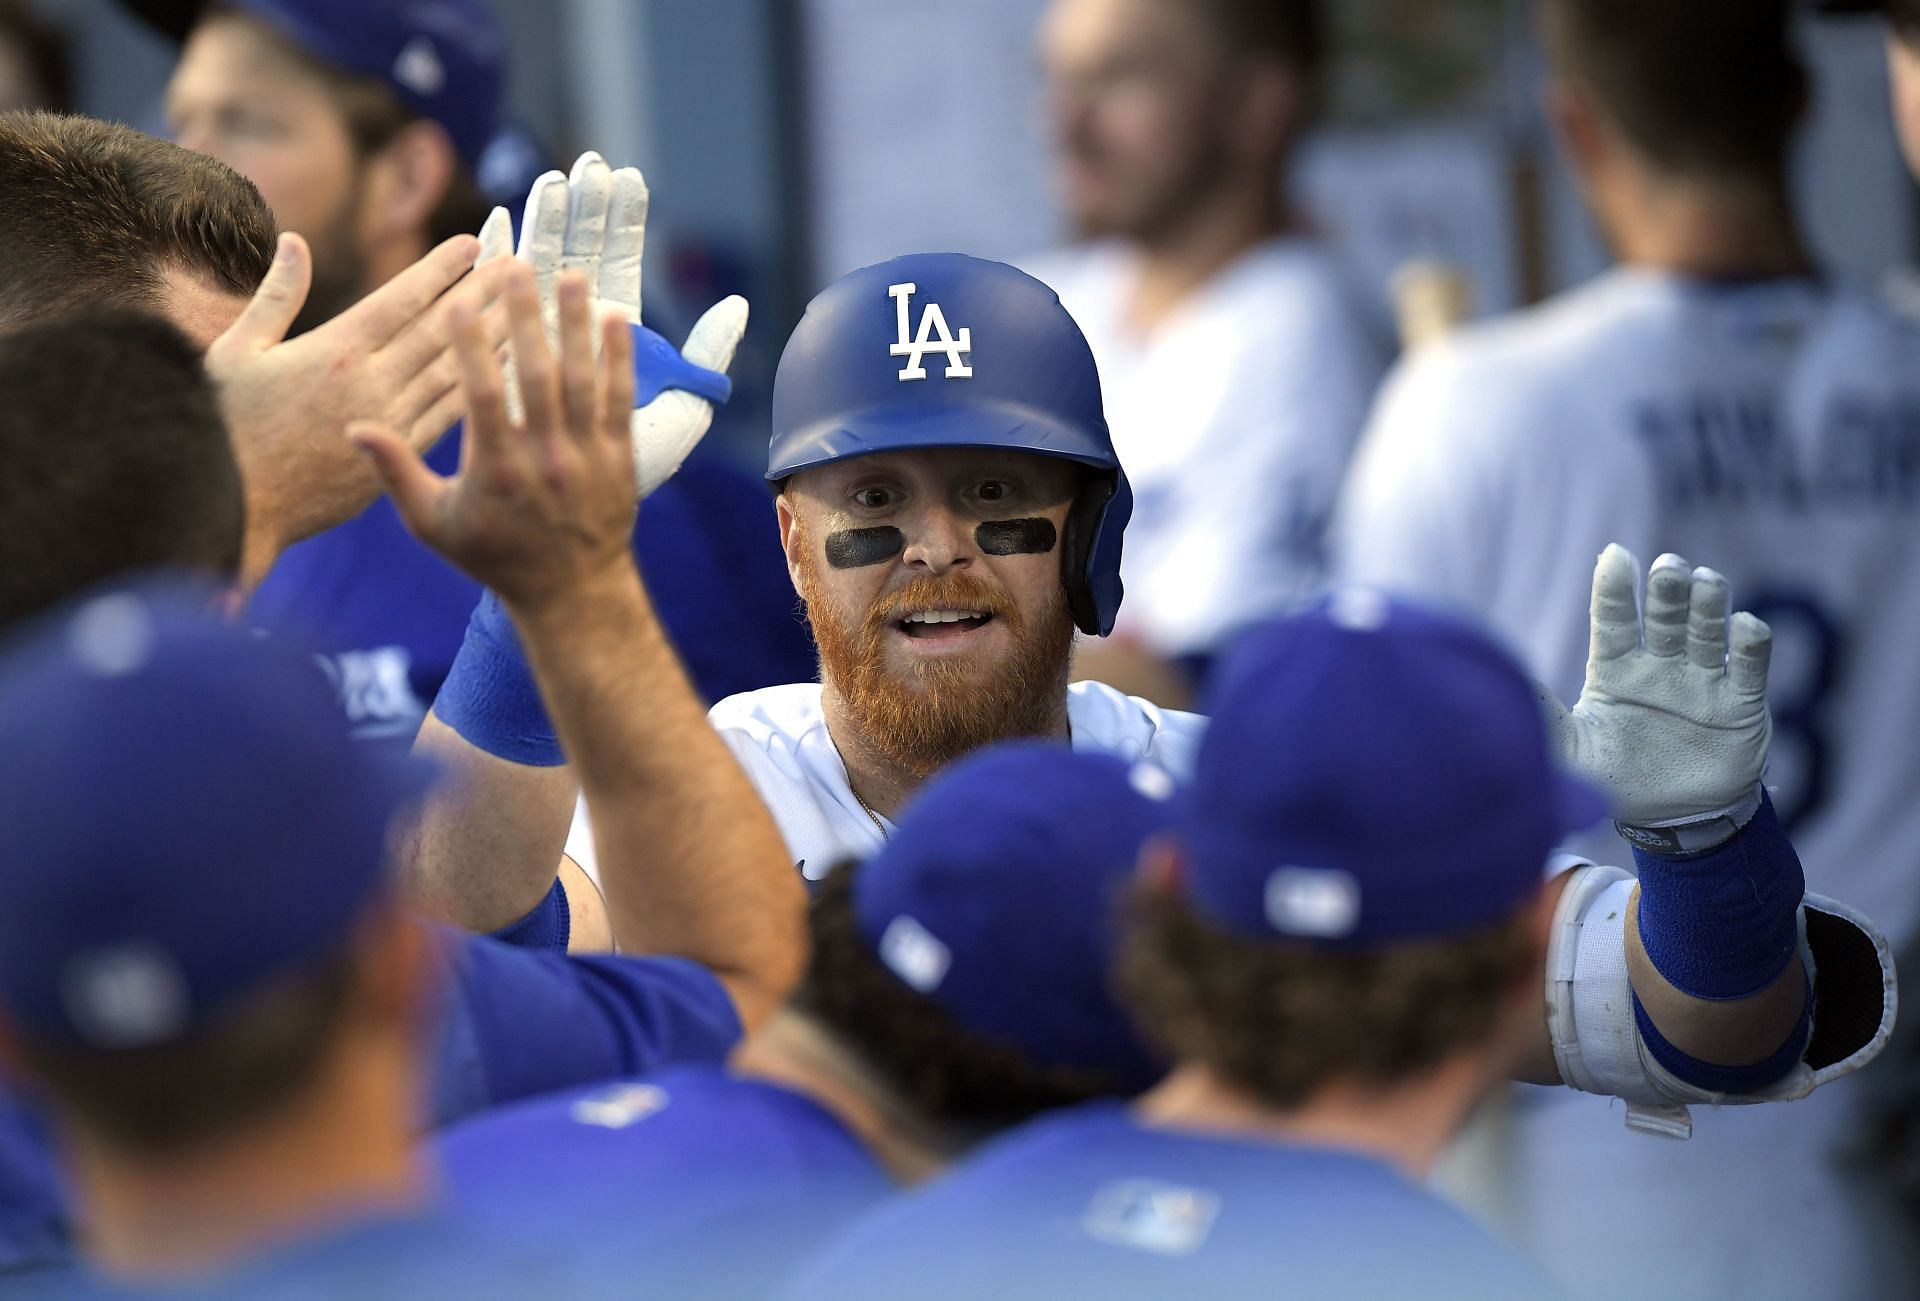 If the Dodgers win the series, they will have a 3 1/2 game lead in the NL West.